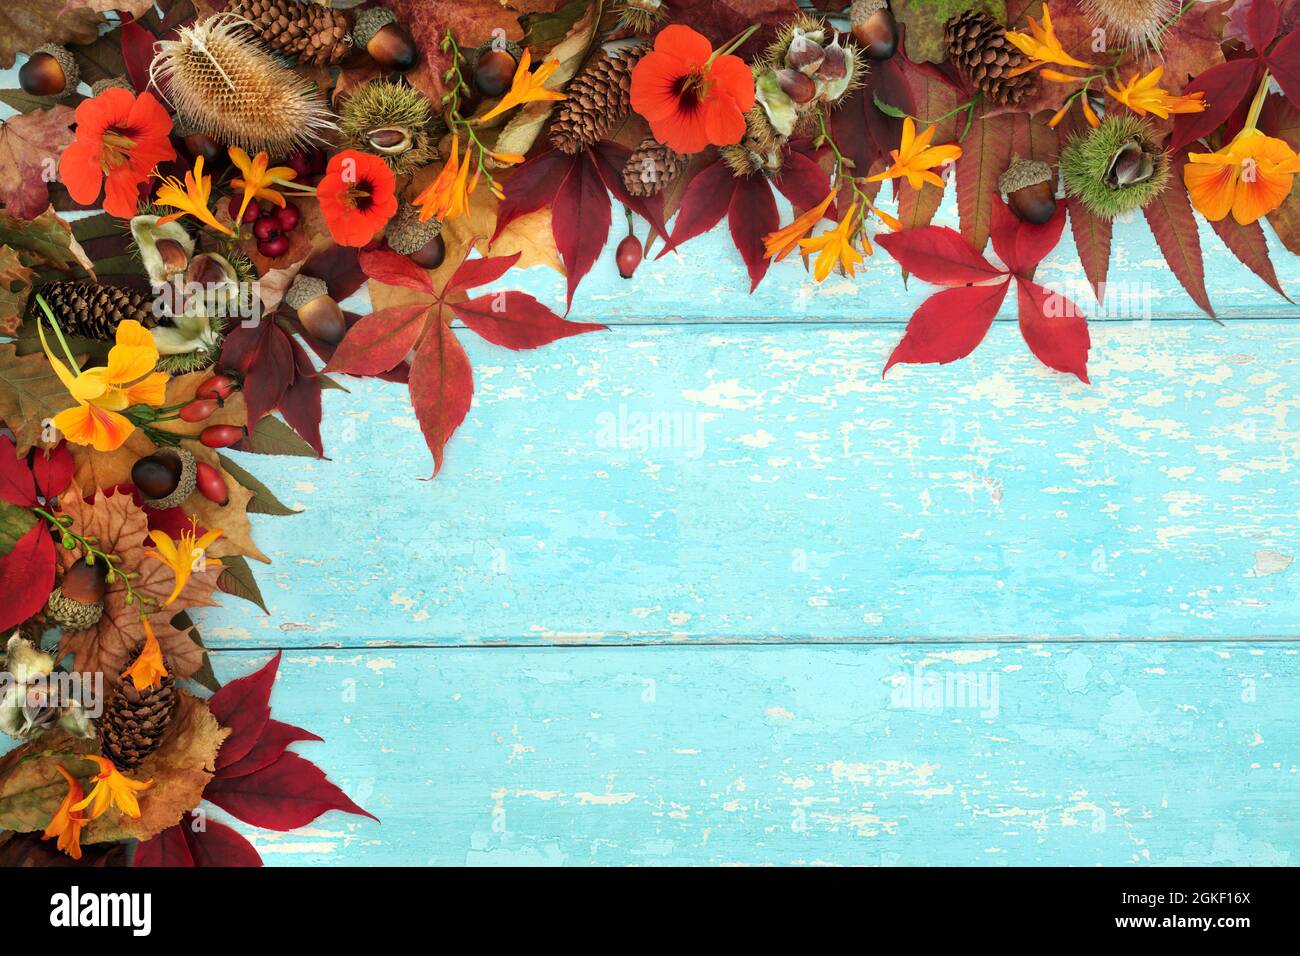 Autumn harvest abundance concept with European flora and fauna Natural Fall and Thanksgiving background border on rustic blue wood. Stock Photo